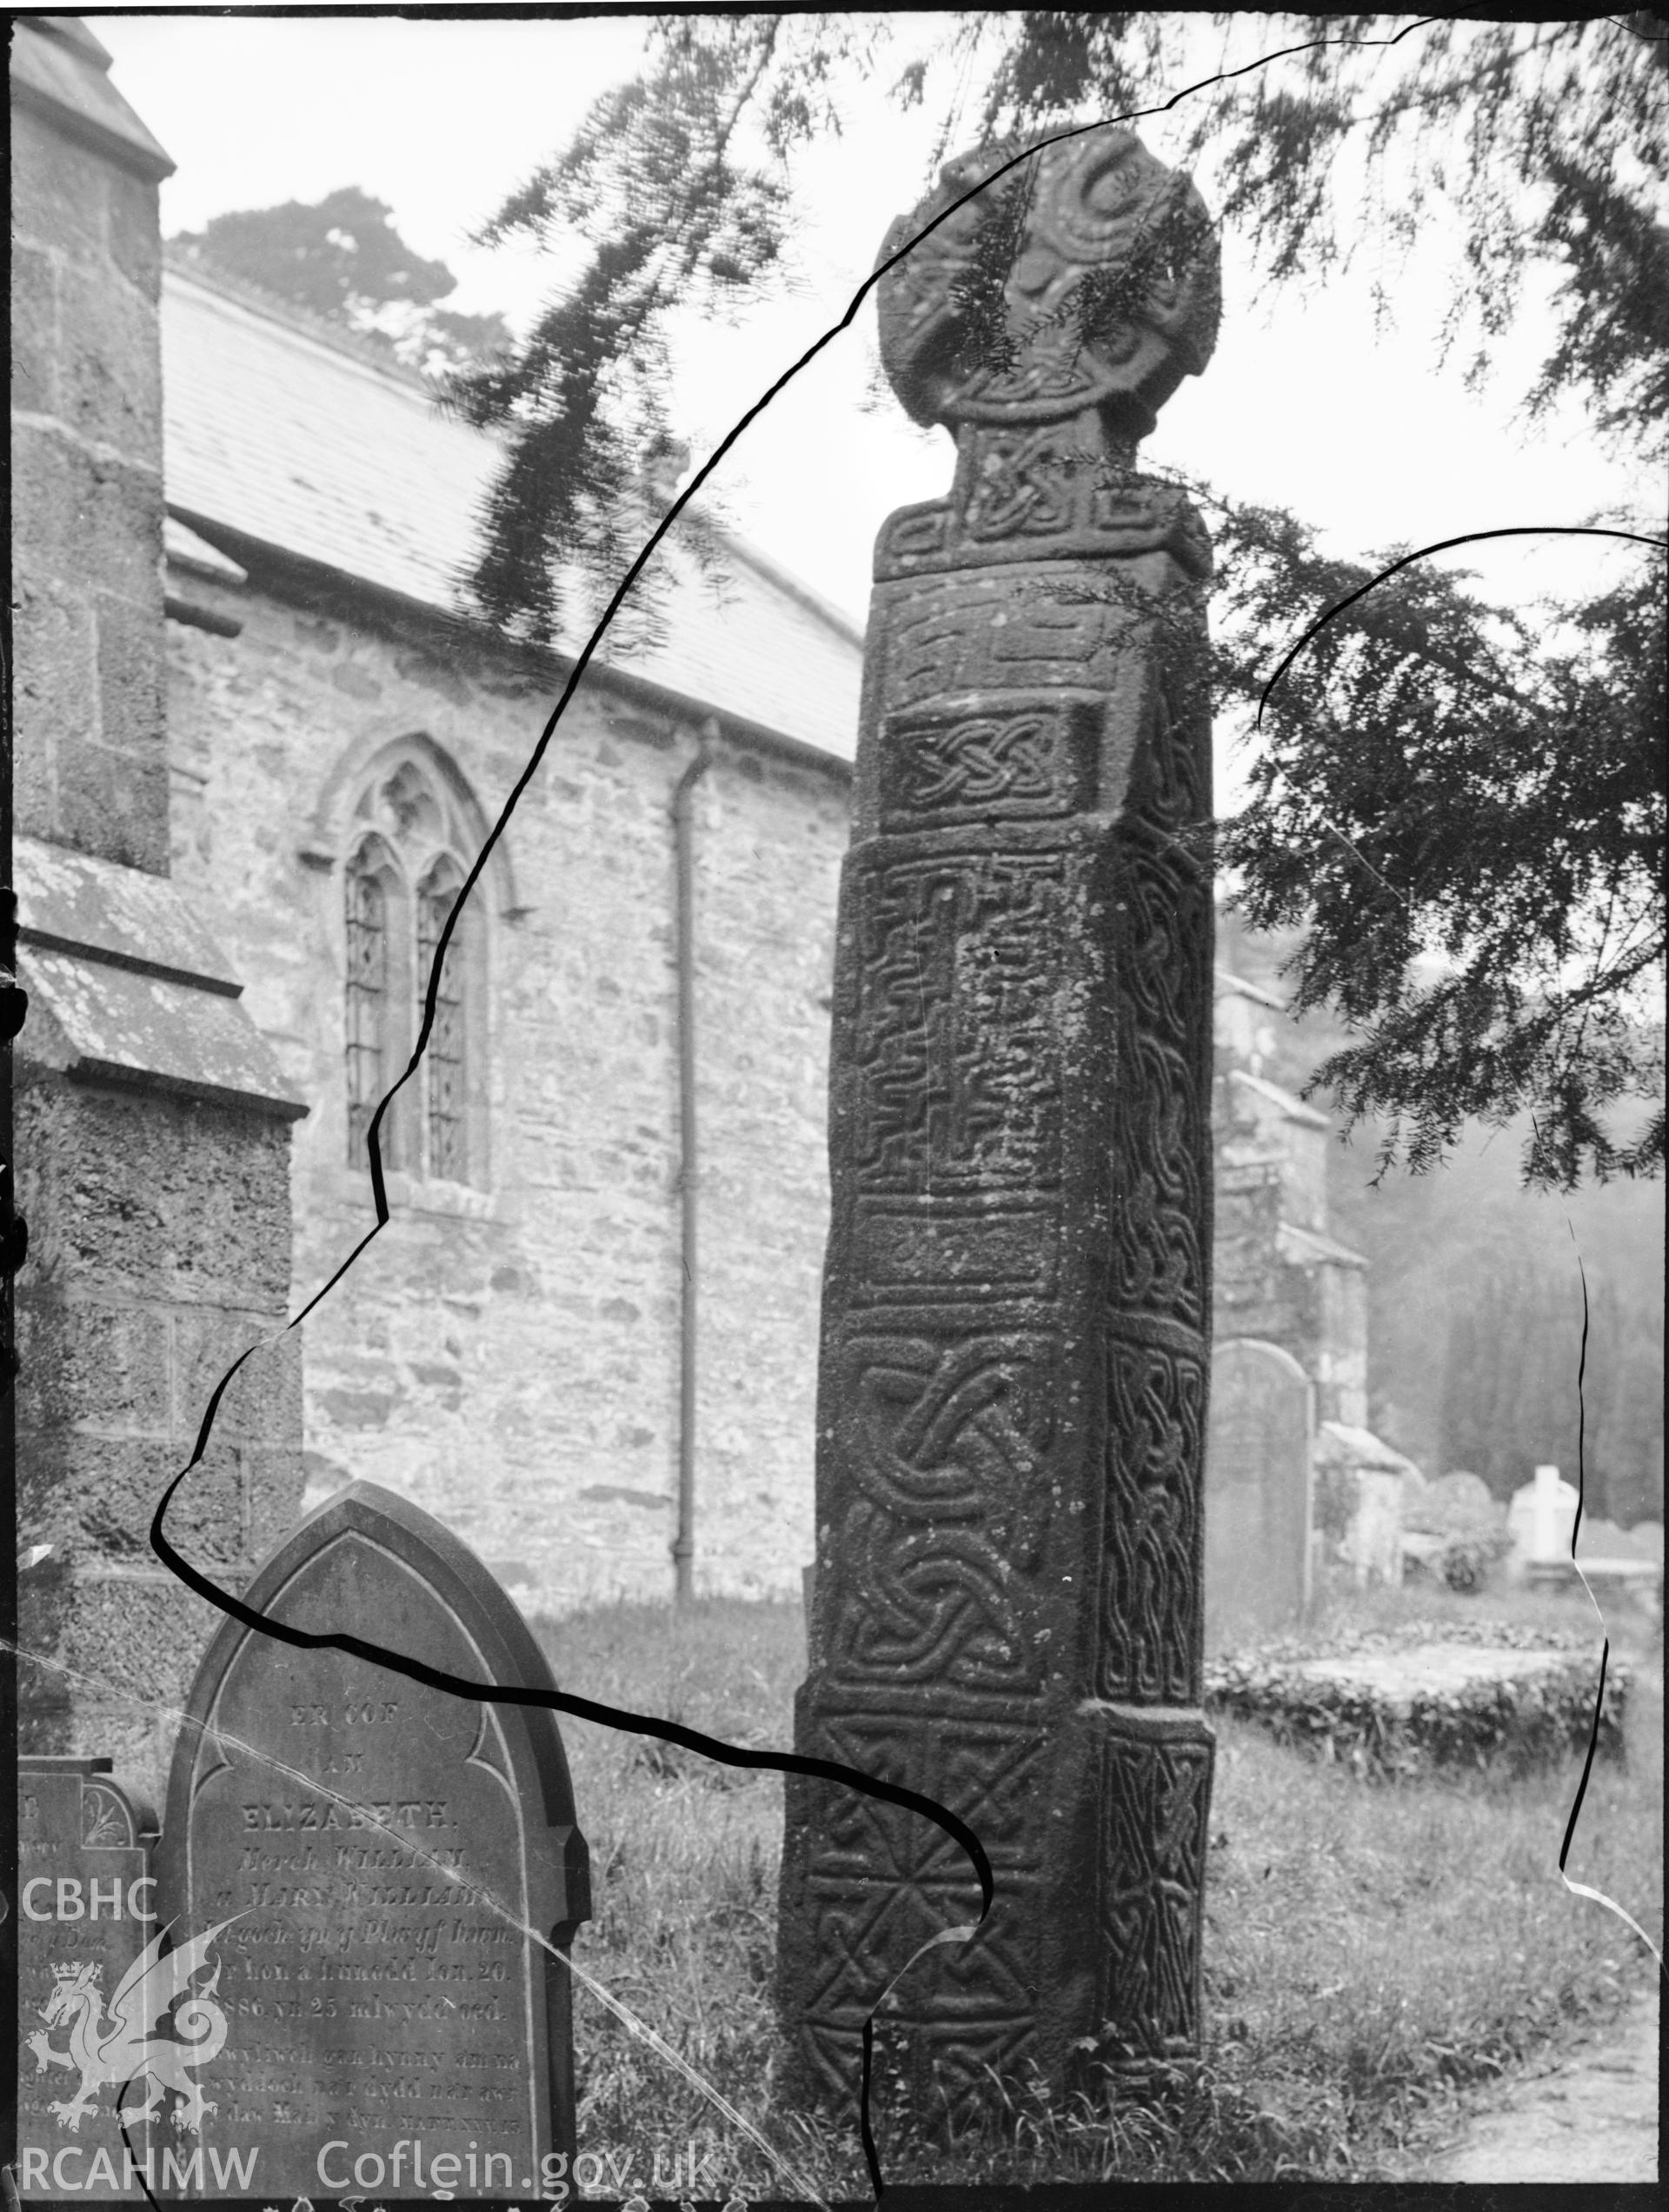 Black and white photo showing St Brynach's Cross, Nevern.